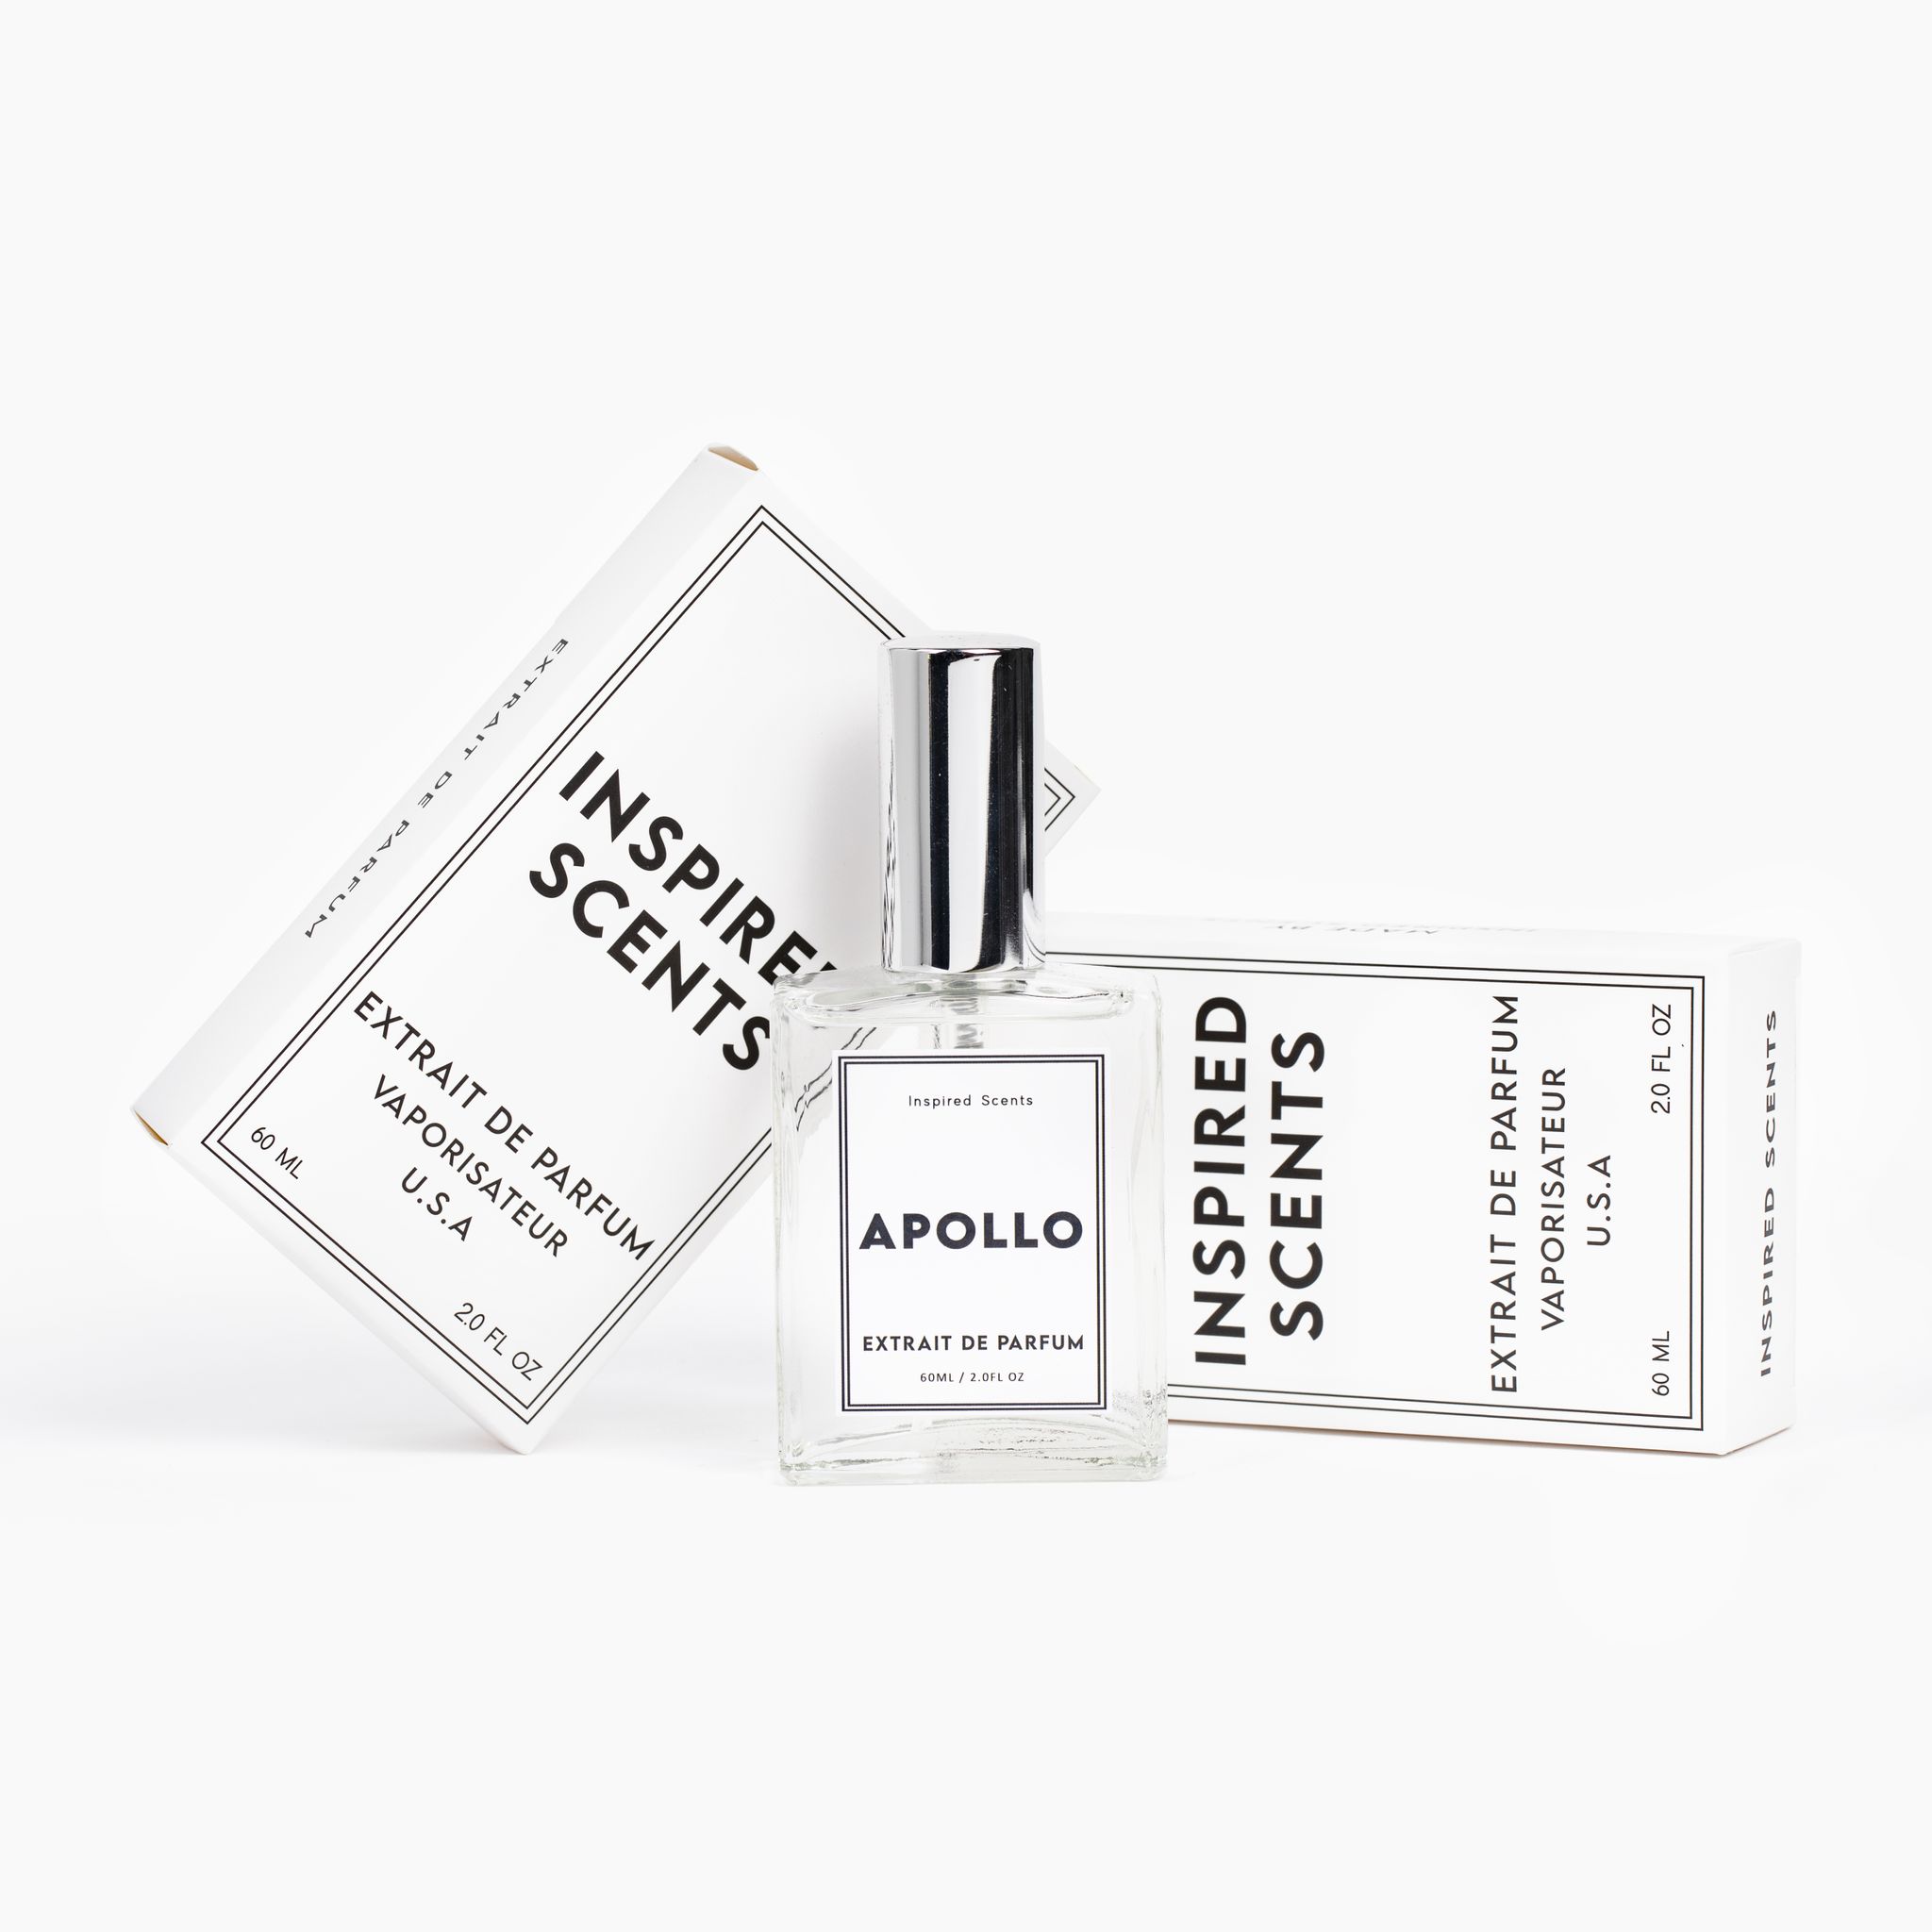 Apollo: Inspired Scents Makes Its Exciting Creed Aventus-Inspired Fragrance Available On Amazon